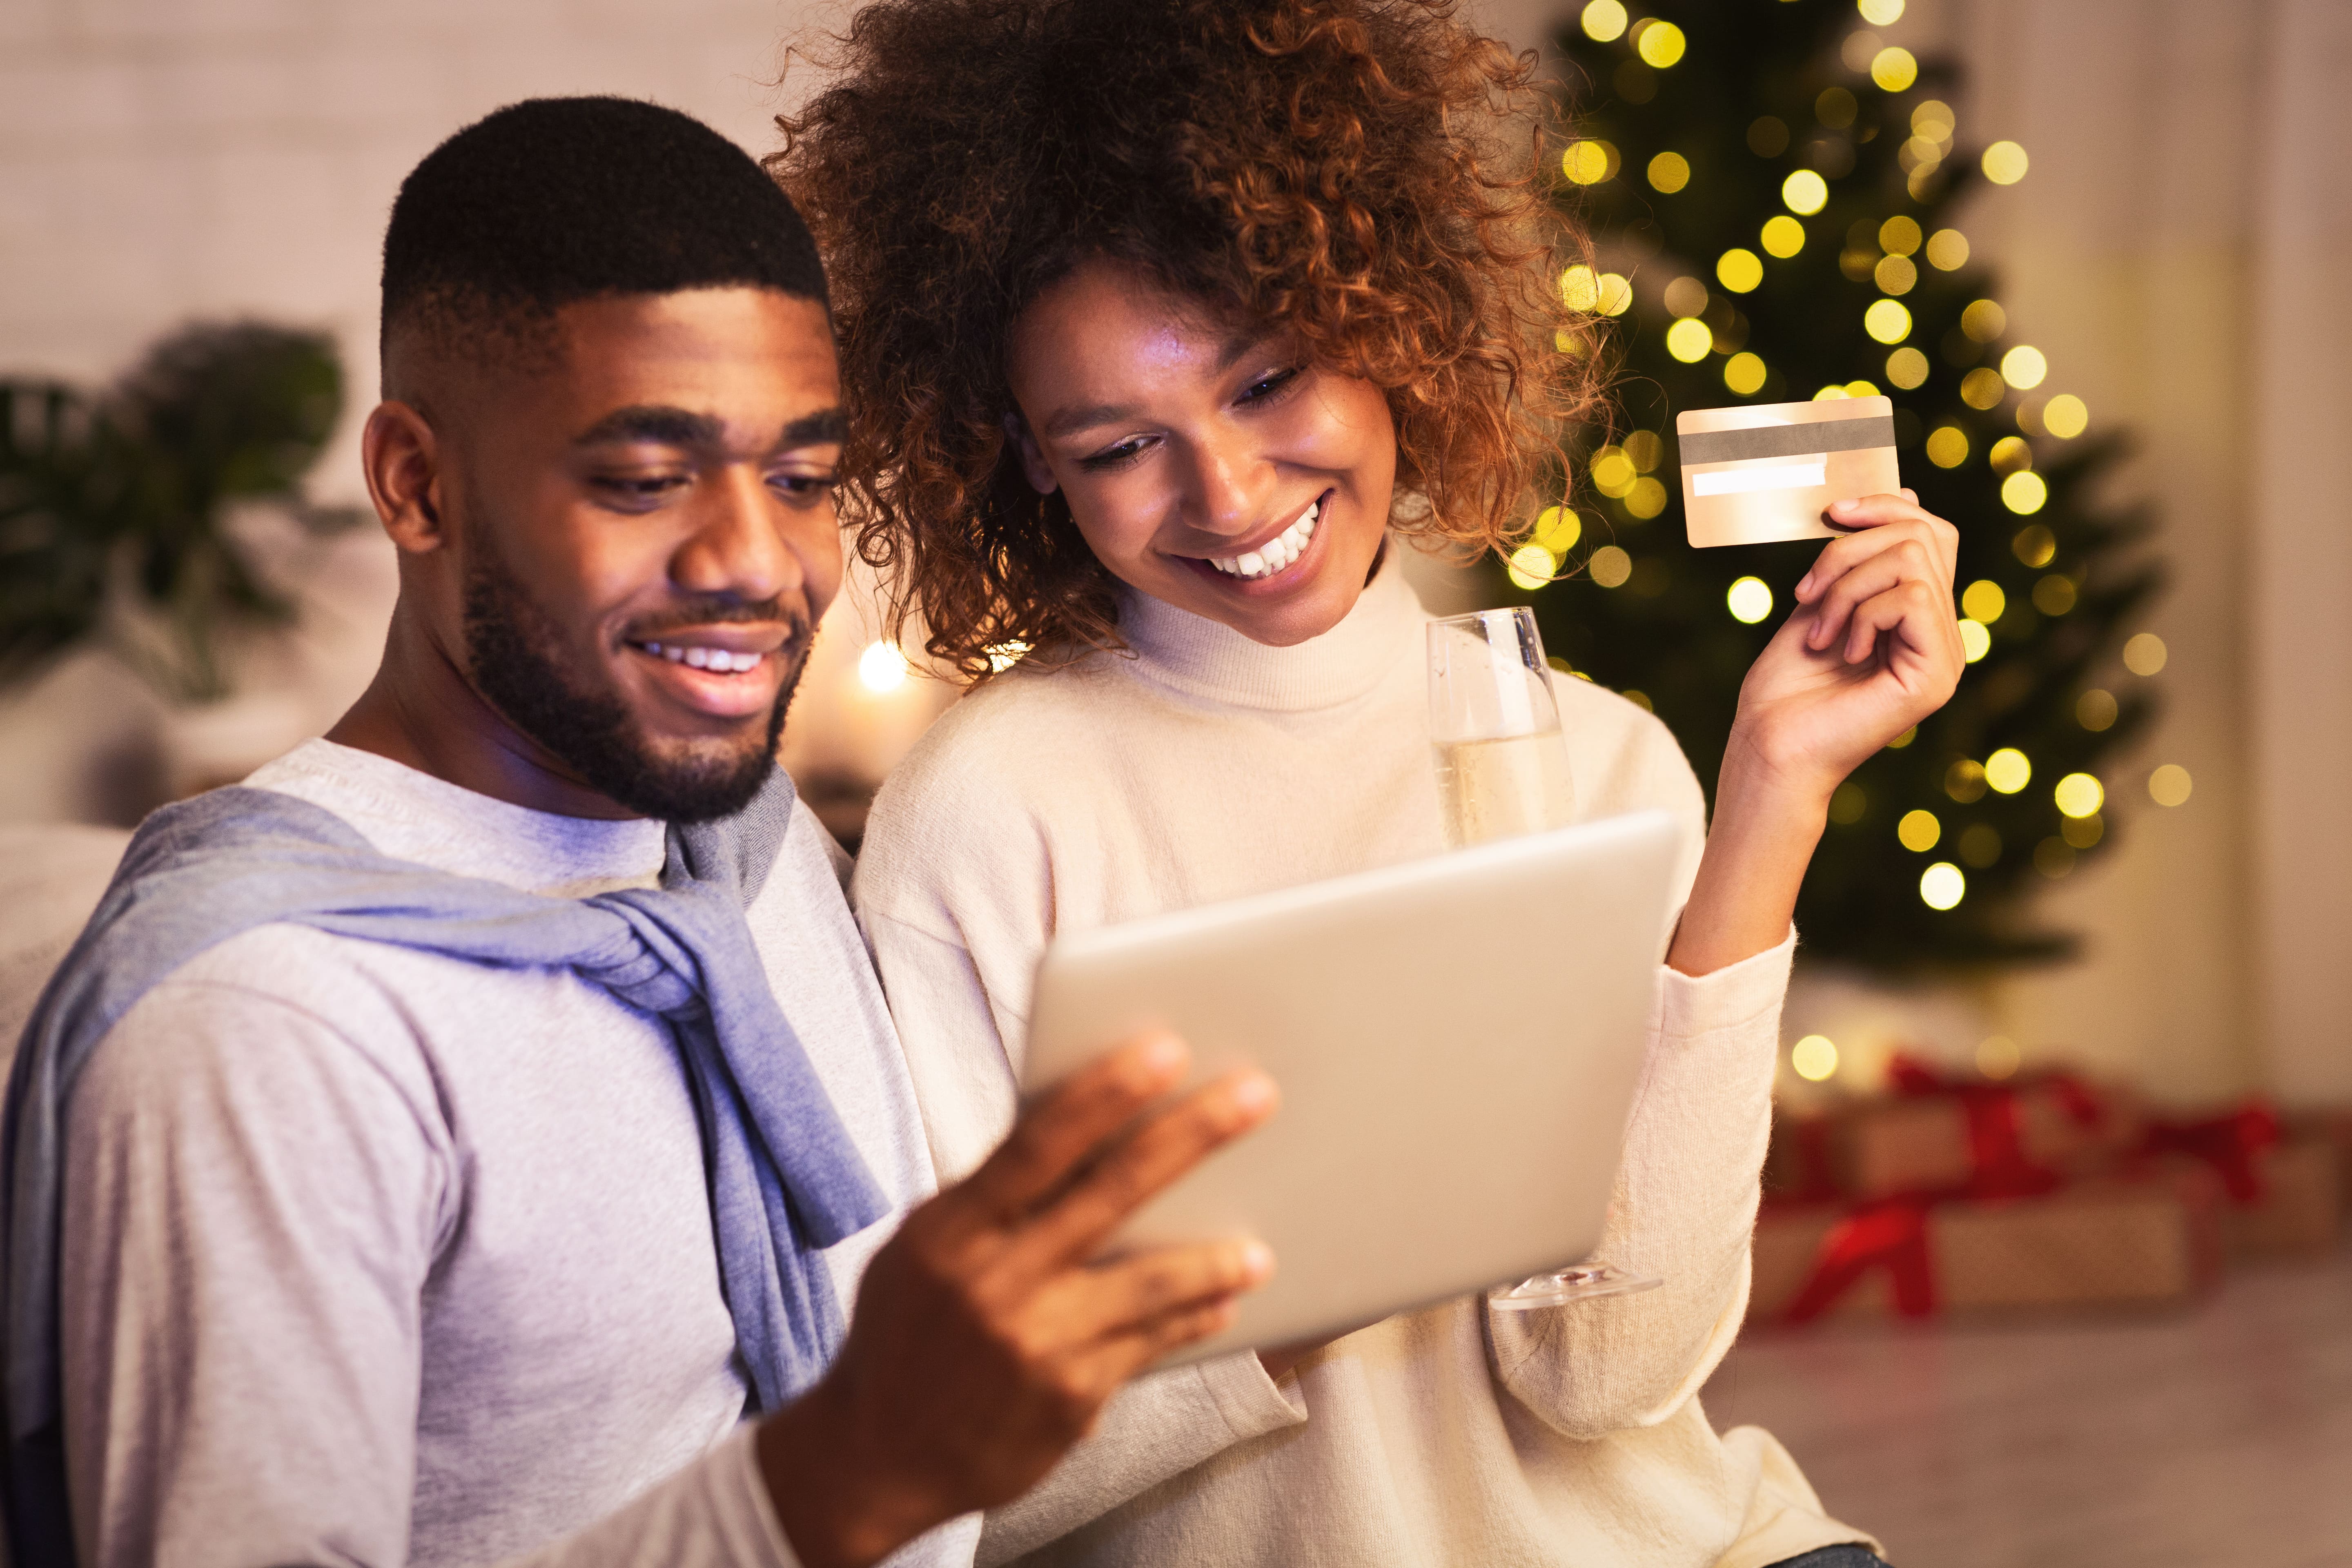 Man and woman at home smiling as they look at an electronic tablet. The woman is holding a credit card in her hand and there is a Christmas tree strewn with lights and with gifts underneath in the background.